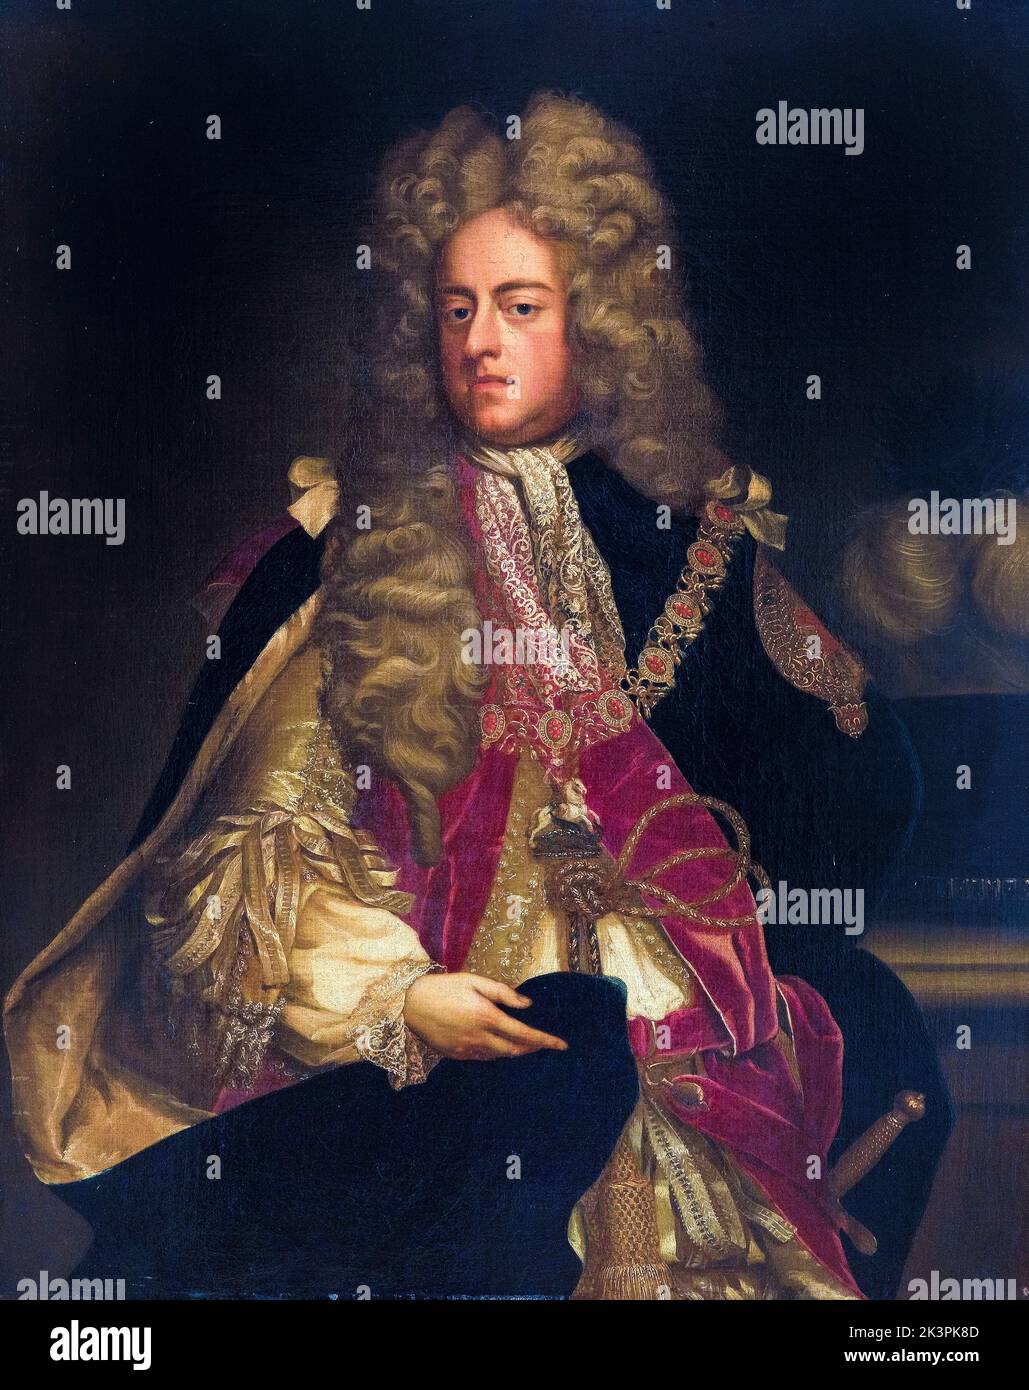 King George I of Great Britain and Ireland (1660-1727), reign (1714-1727), portrait painting in oil on canvas by artist of the English School, 1700-1799 Stock Photo